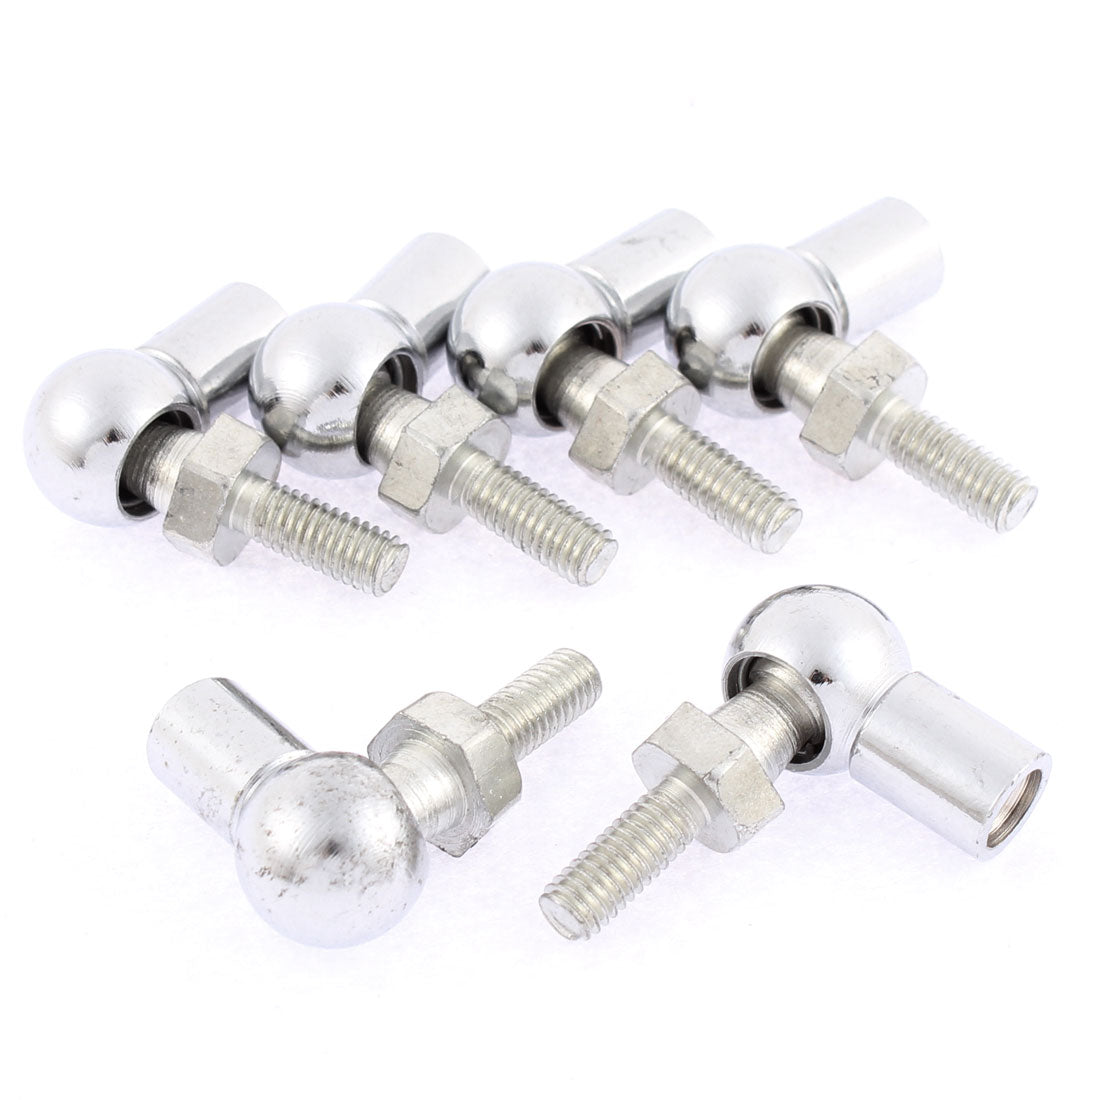 uxcell Uxcell 6mm Male 8mm Female Thread L Shape Ball Joint Rod End Bearing Silver Tone 6pcs